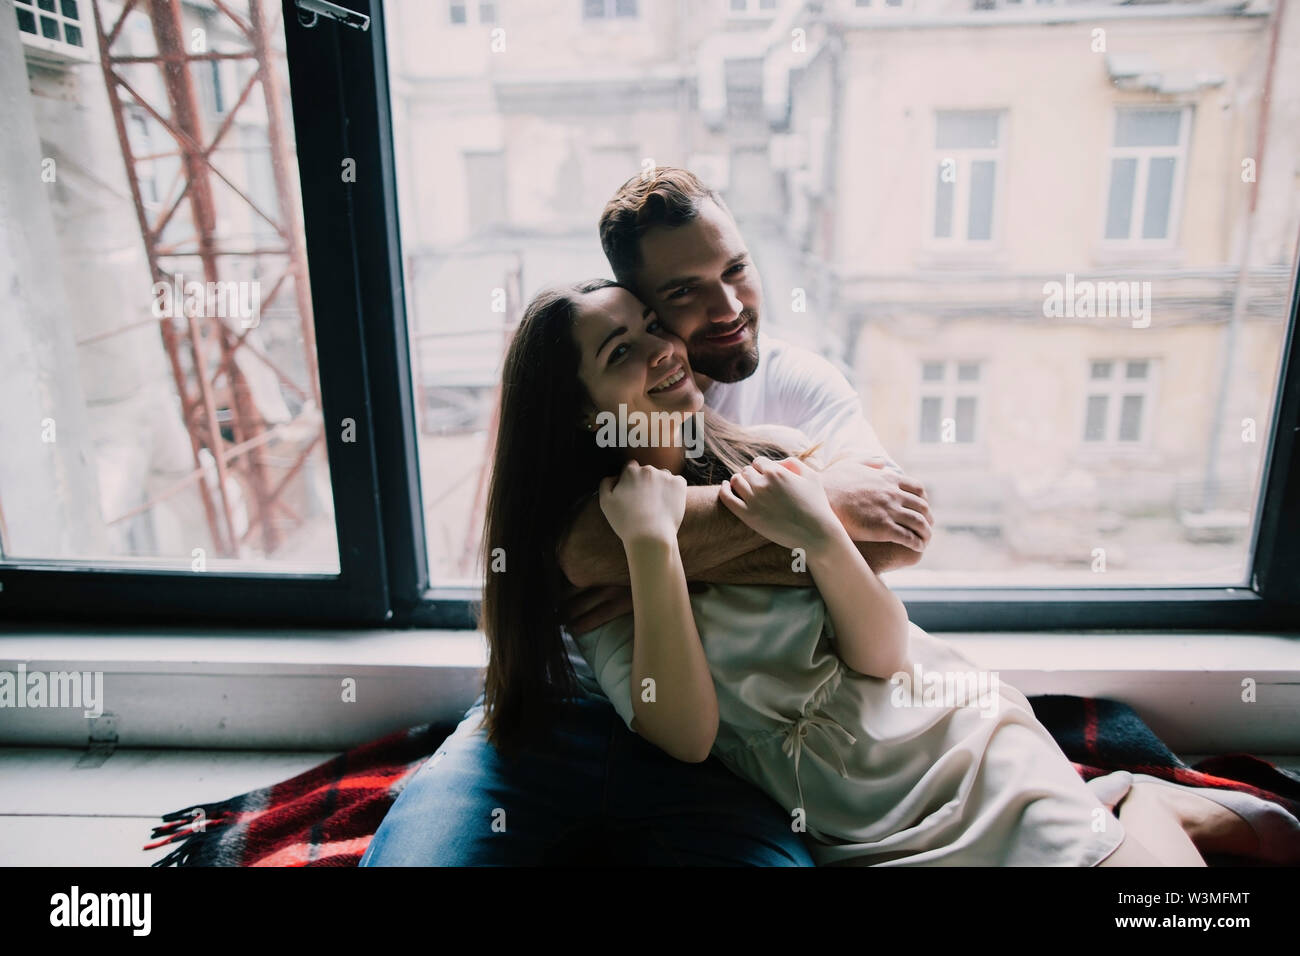 Young couple embracing by apartment window Stock Photo